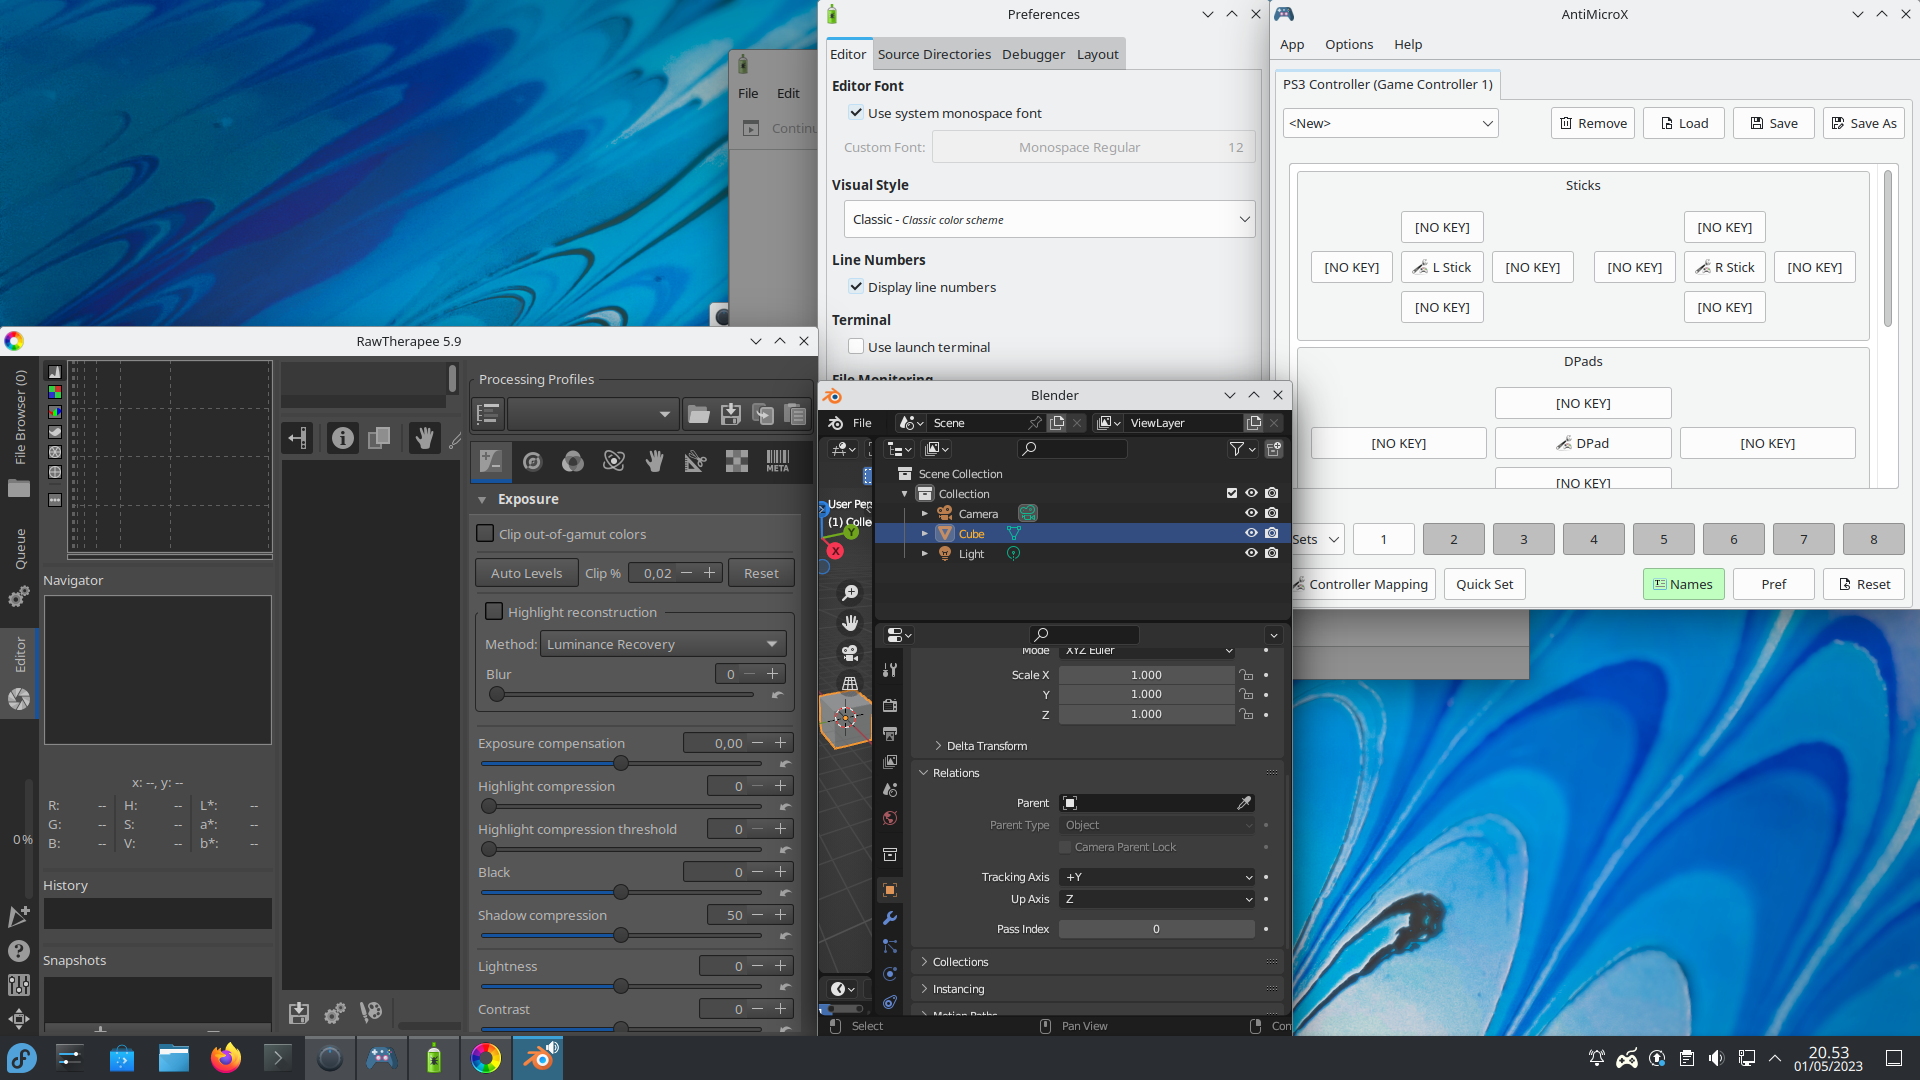 Linux applications: Nemiver on GTK3, Antimicrox on Qt5, Blender, and RawTherapee